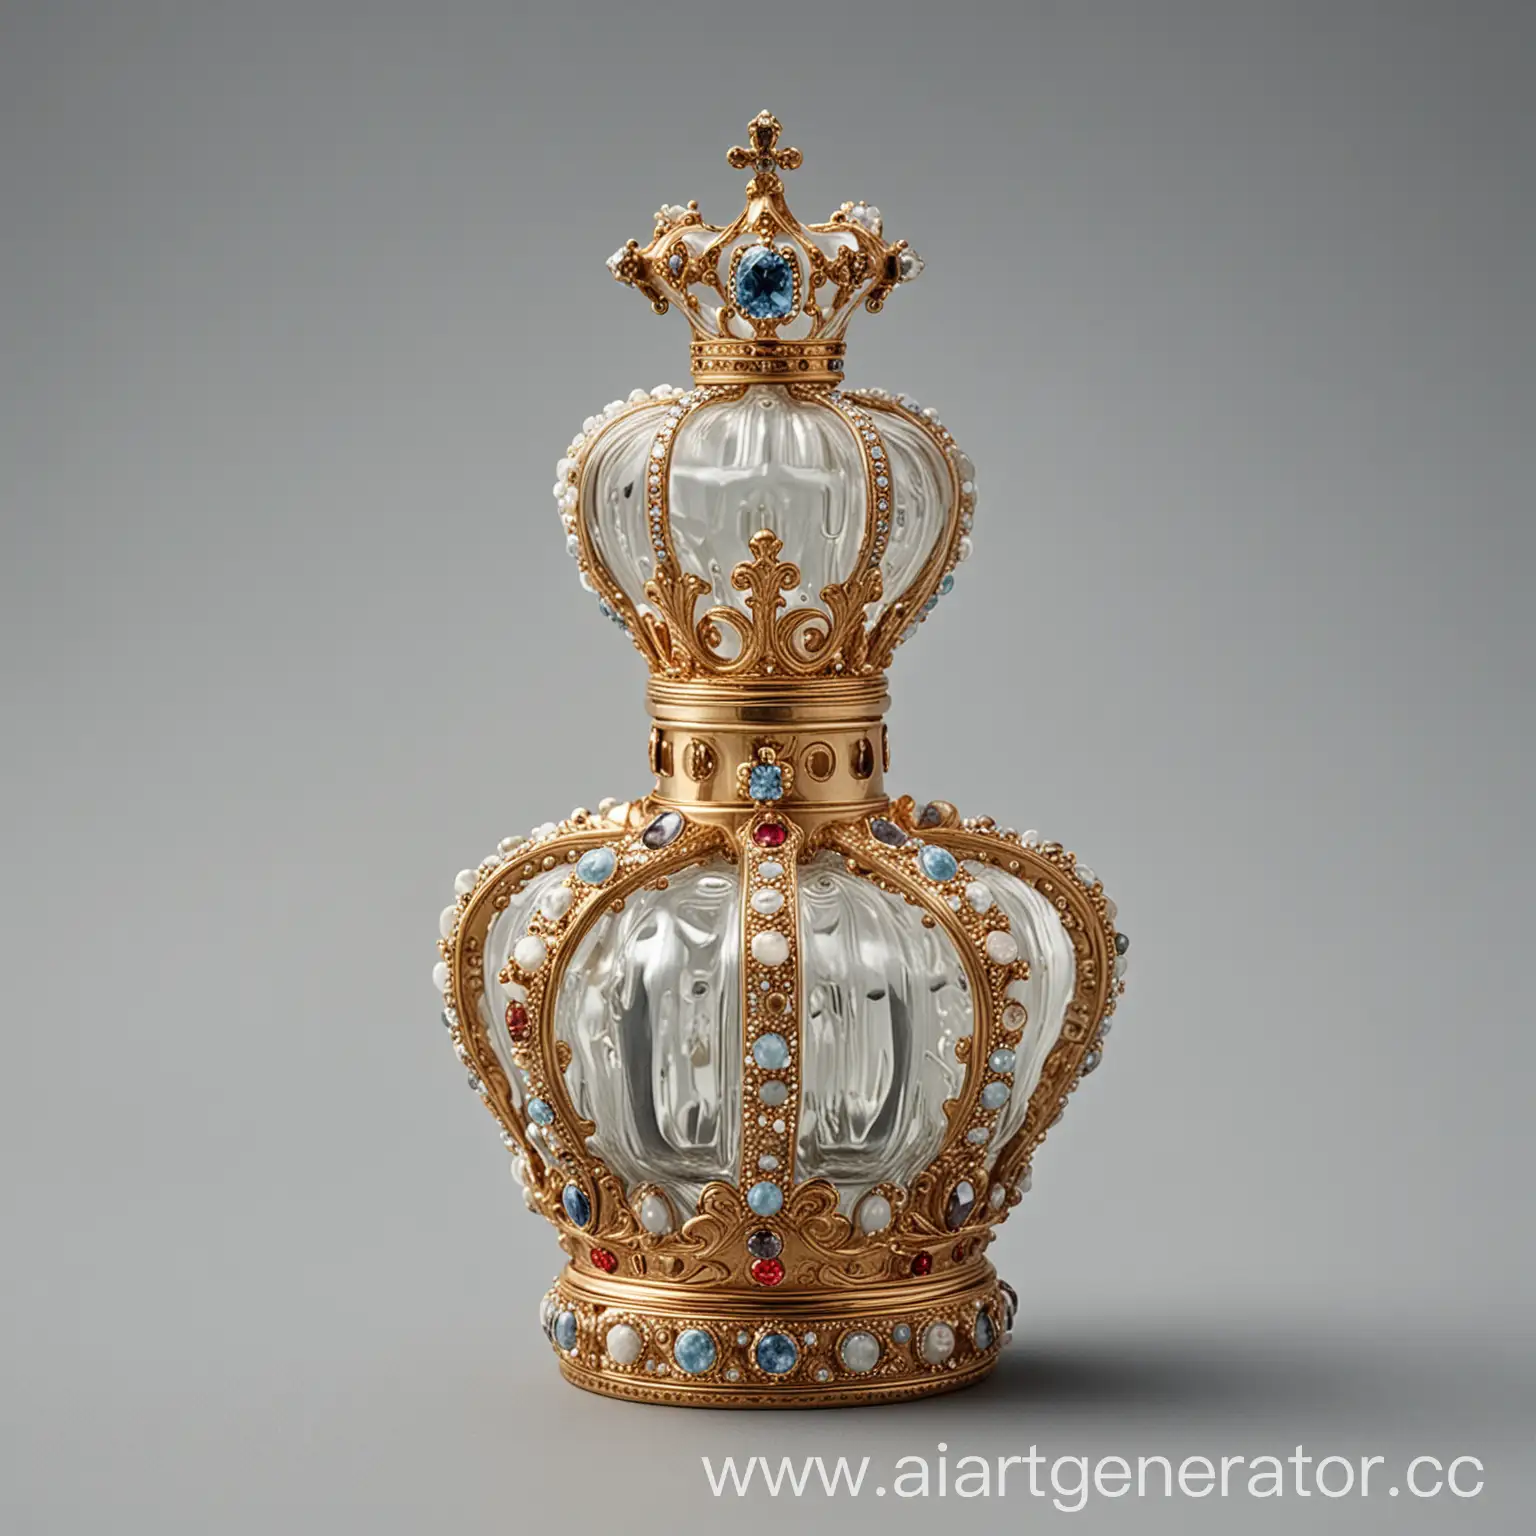 Luxurious-Fragrance-Bottle-with-Russian-Imperial-CrownShaped-Cap